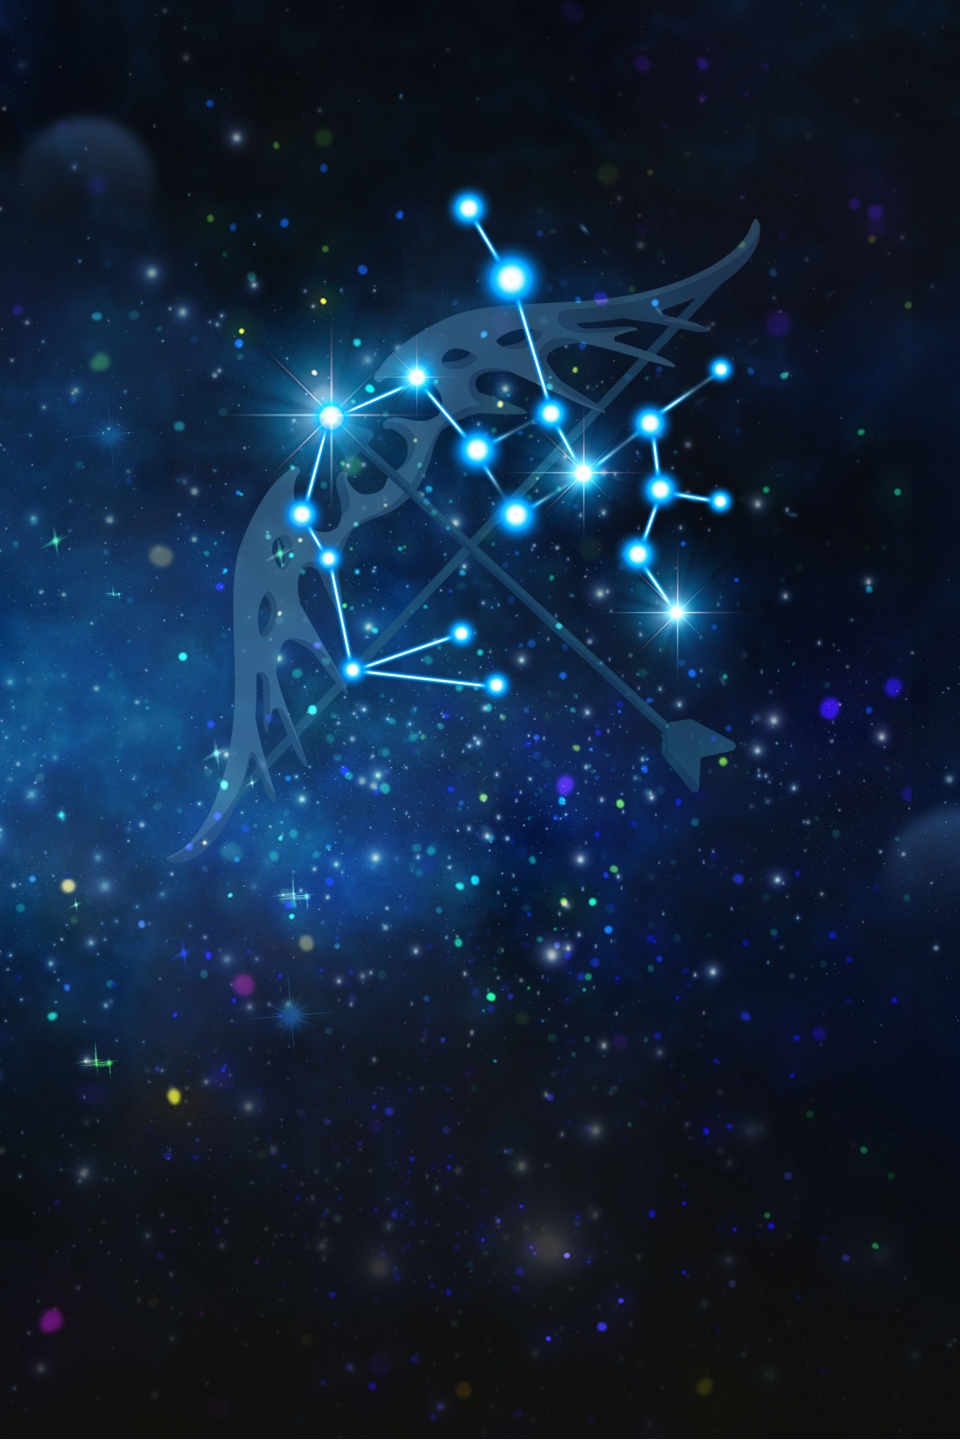 Constellation Sagittarius Beautiful Starry Sky Background Synthesis Wallpaper Image For Free Download